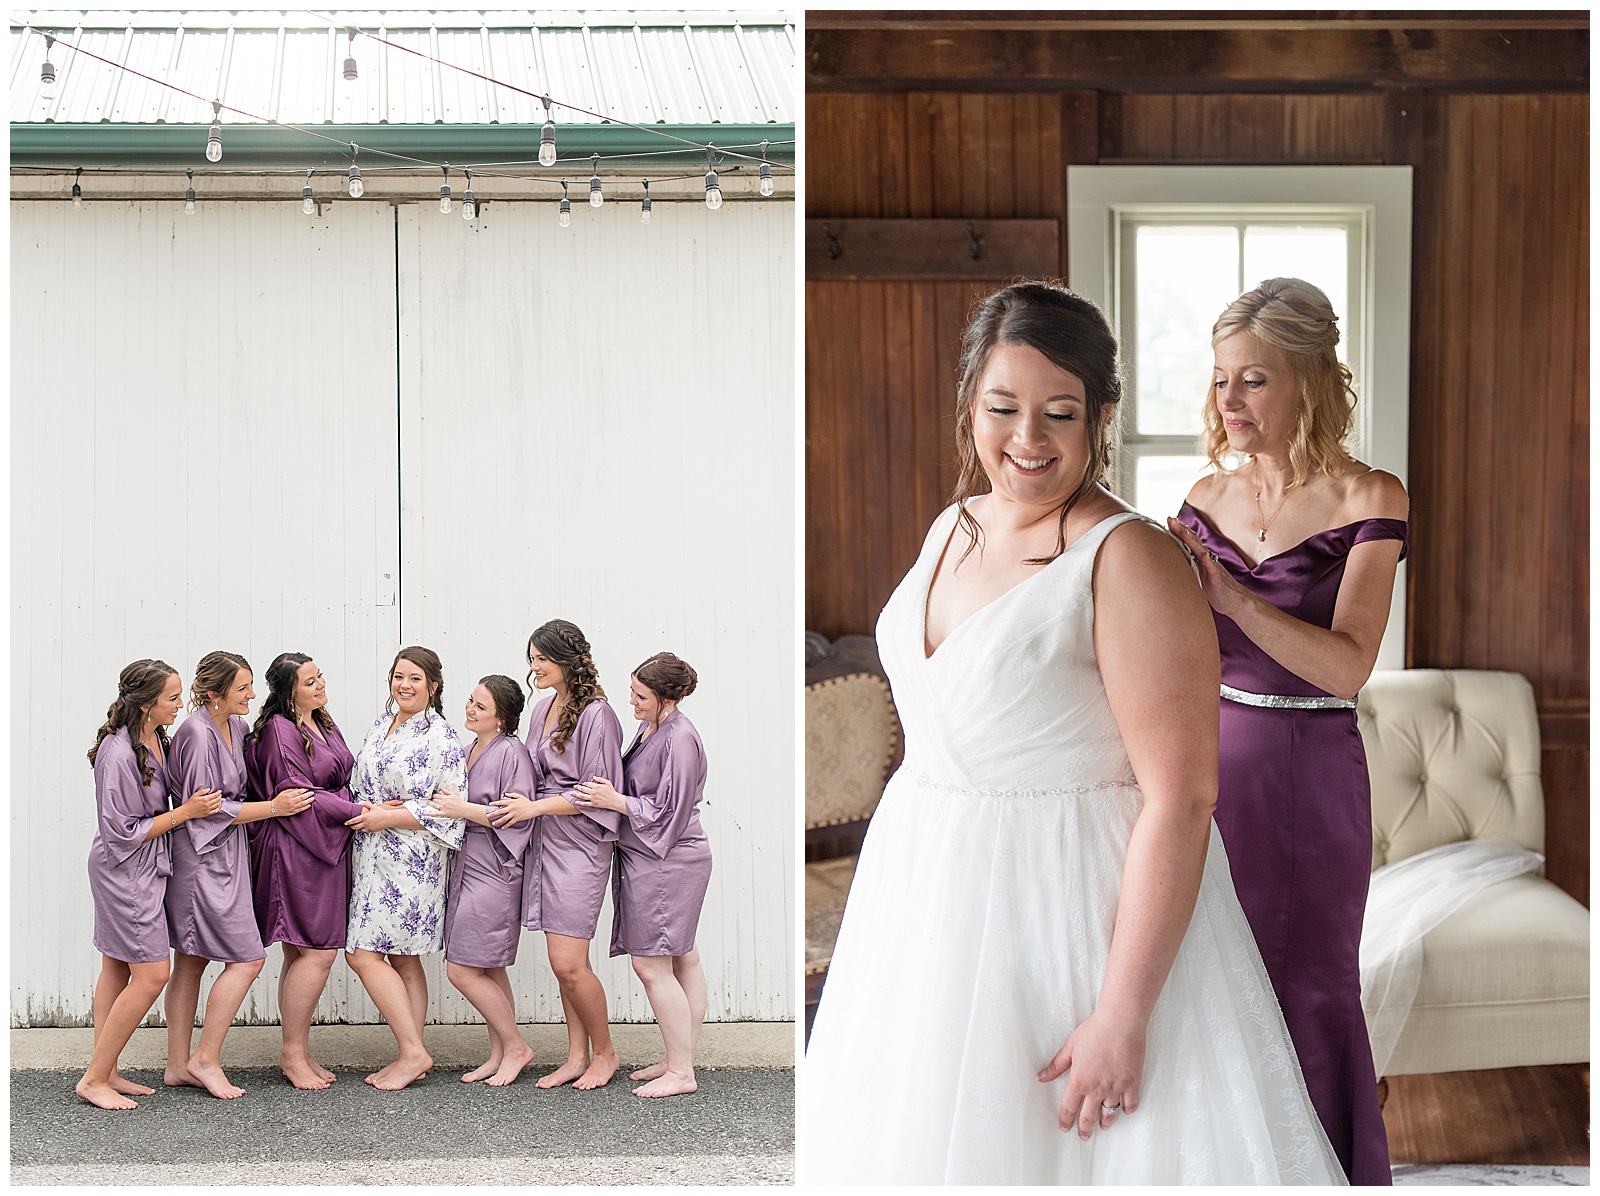 maid of honor in dark lavender dress helps to button up the back of bride's wedding gown in bridal suite